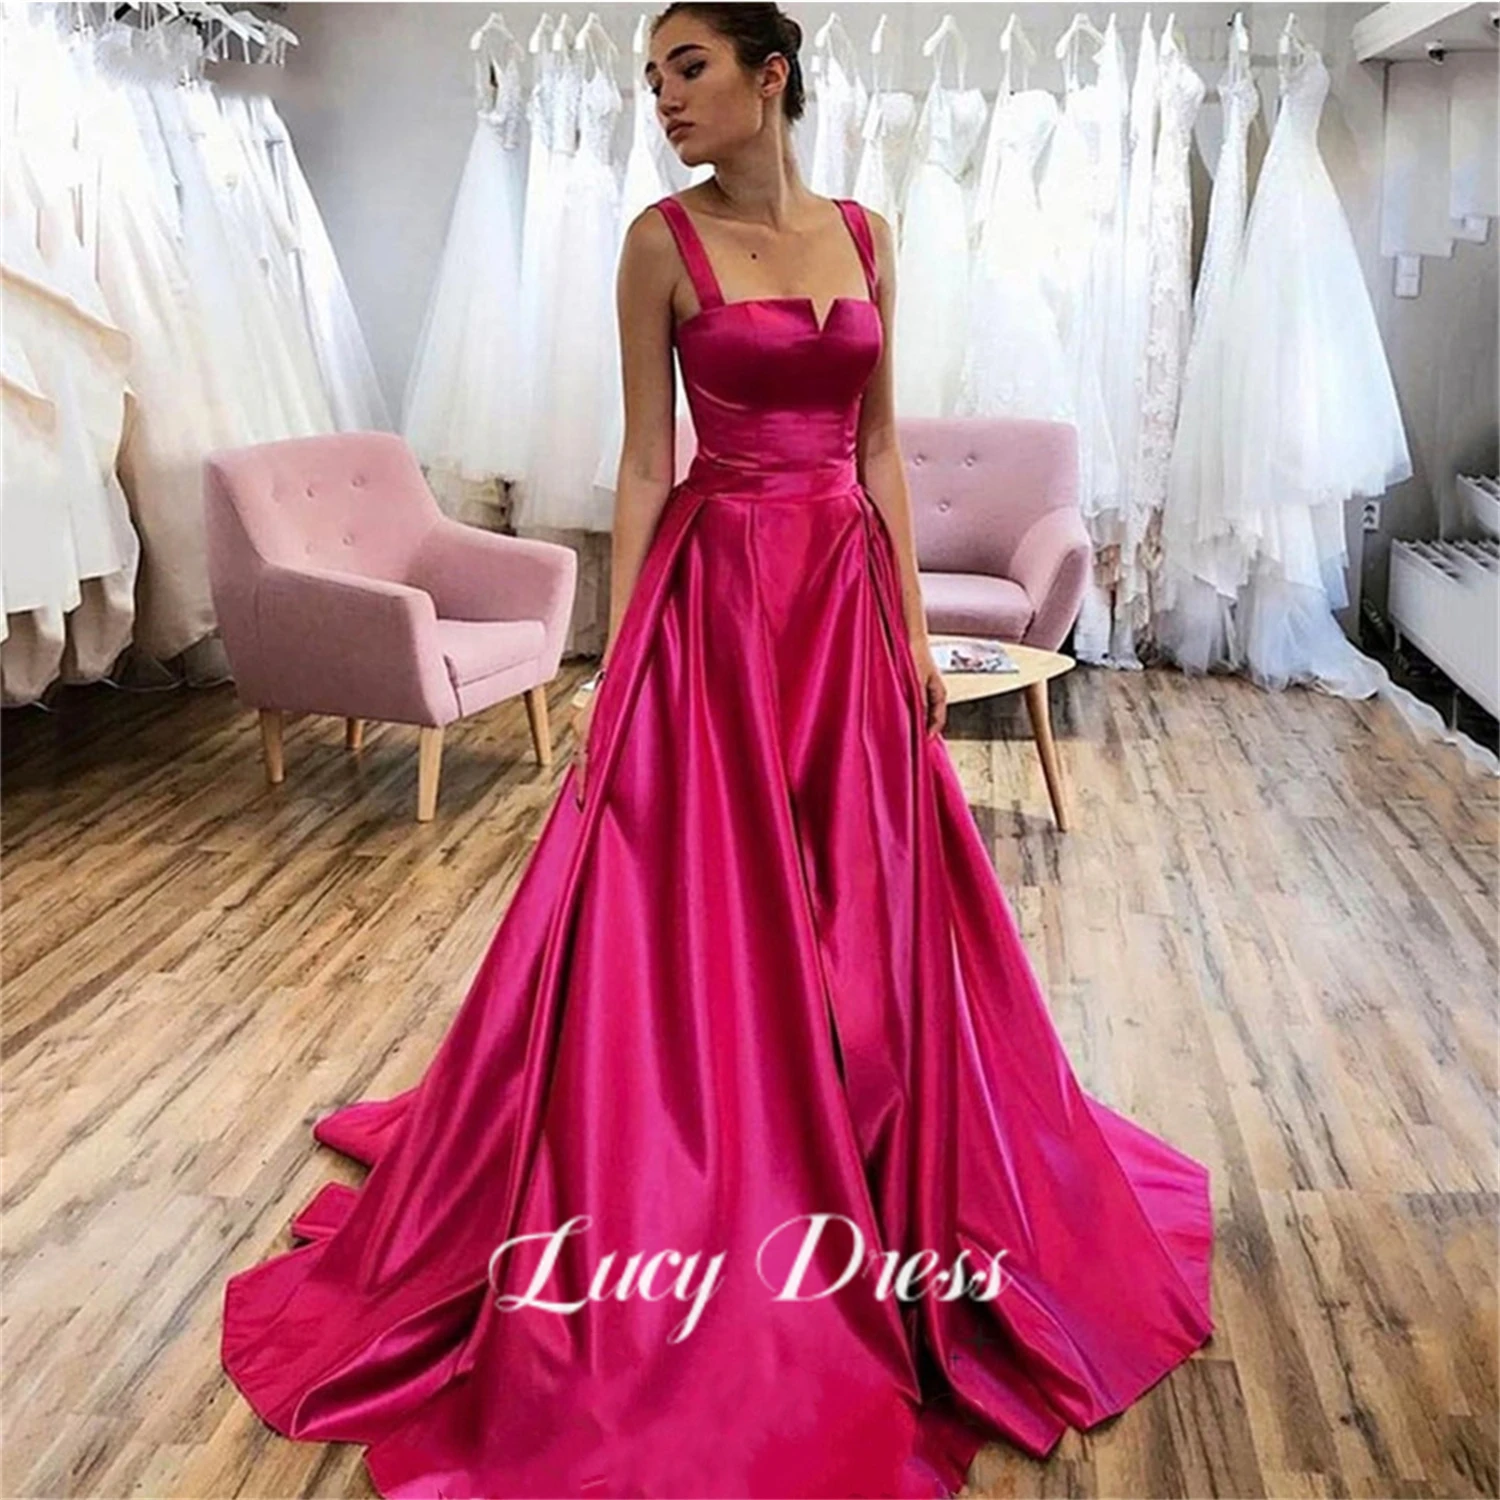 

Lucy Shiny Satin Party Dress Rose Pink Satin Sweep Train Evening Dresses Sleeveless A-line Vestidos De Noche Sweetie Prom Dress